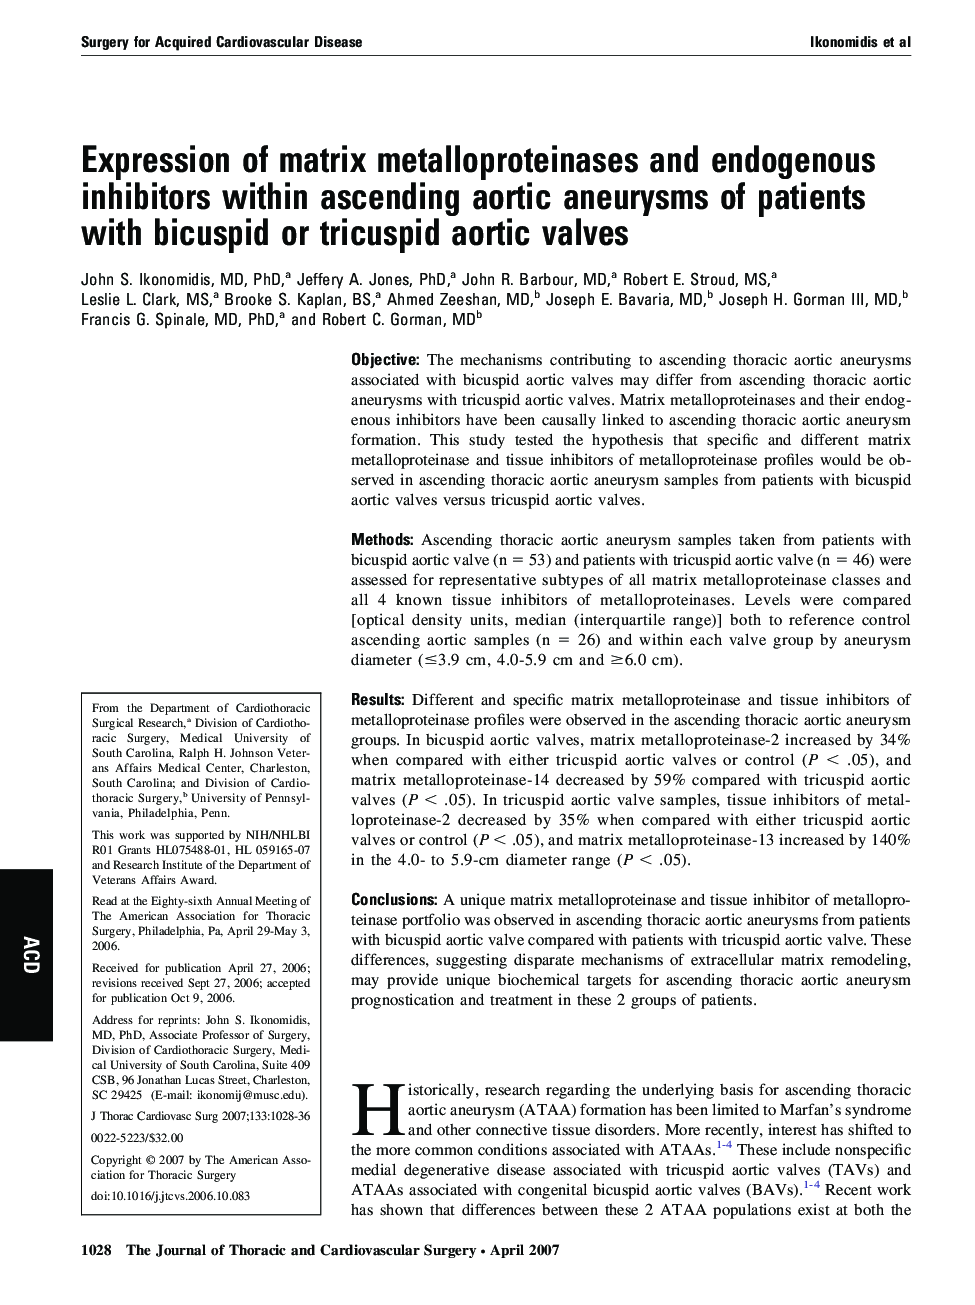 Expression of matrix metalloproteinases and endogenous inhibitors within ascending aortic aneurysms of patients with bicuspid or tricuspid aortic valves 